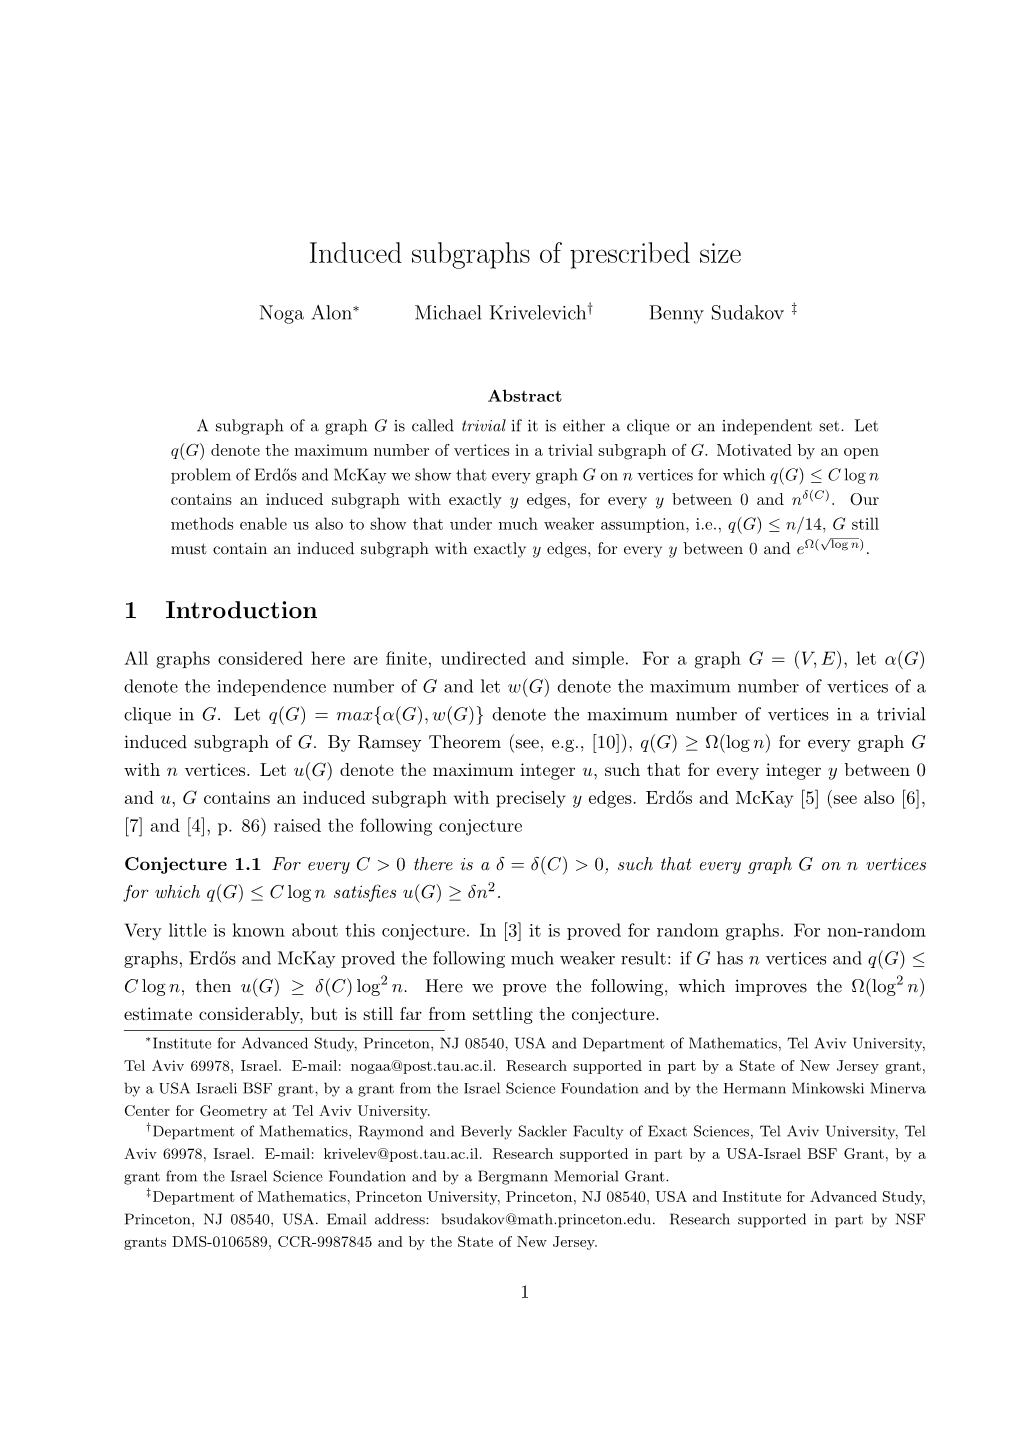 Induced Subgraphs of Prescribed Size, J. Graph Theory 43